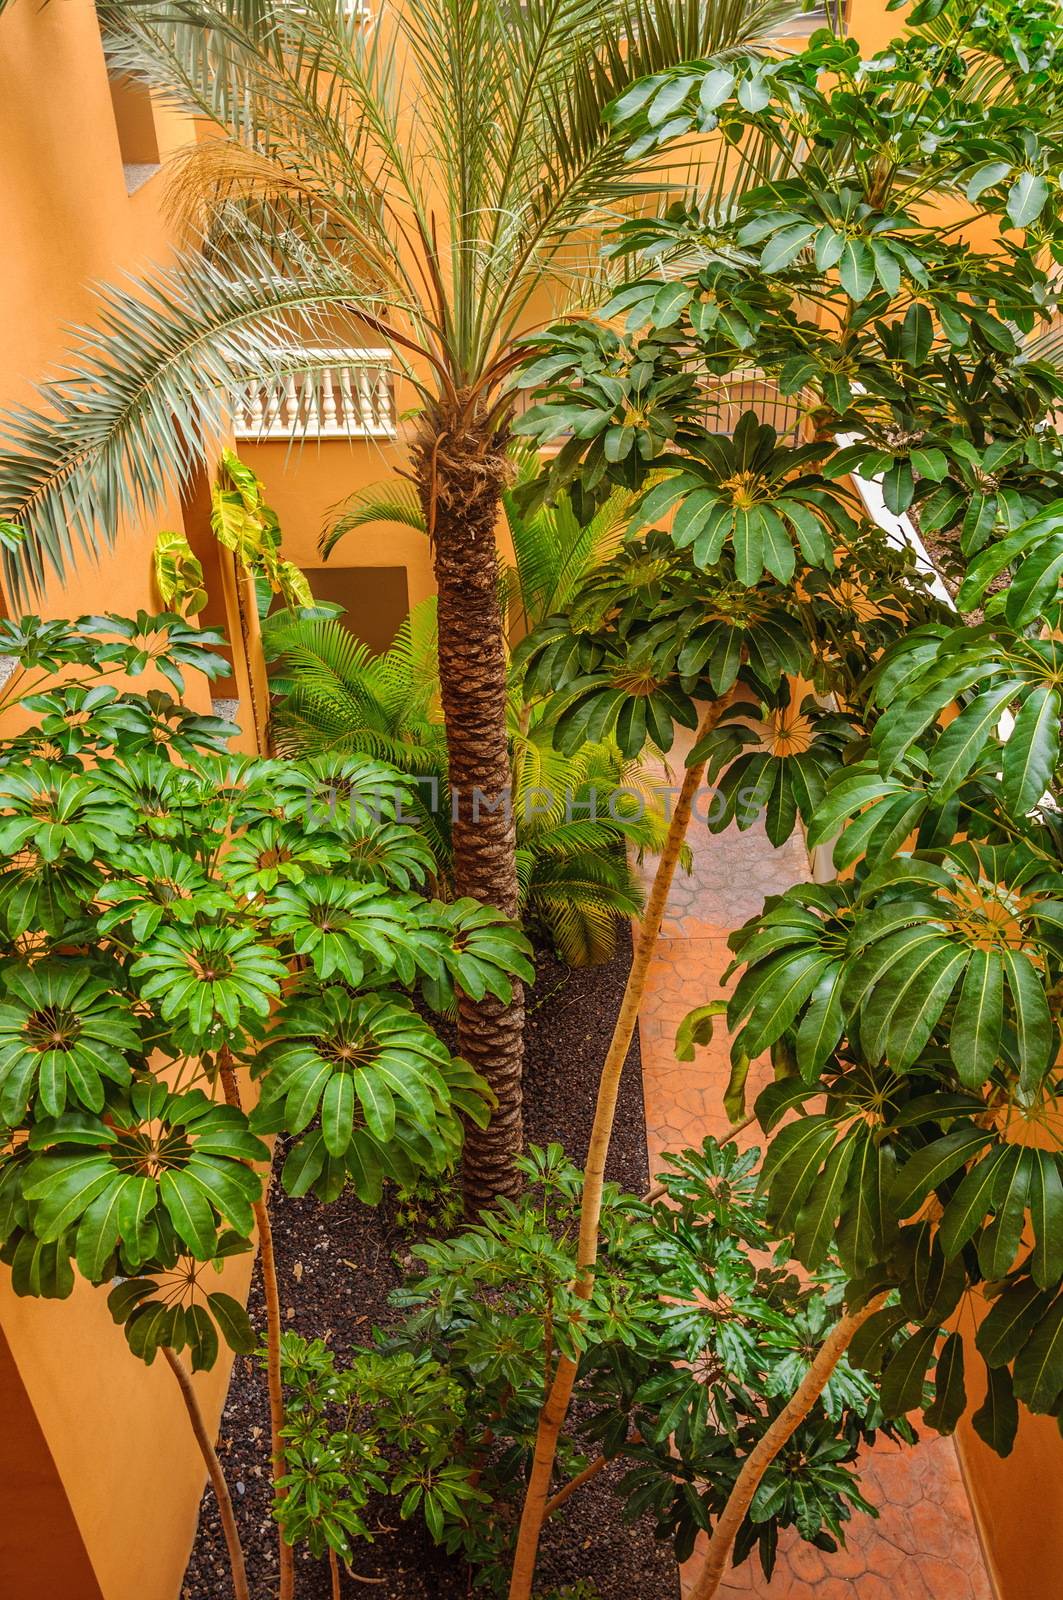 Palms and trees of hotel courtyard in Tenerife, Spain.